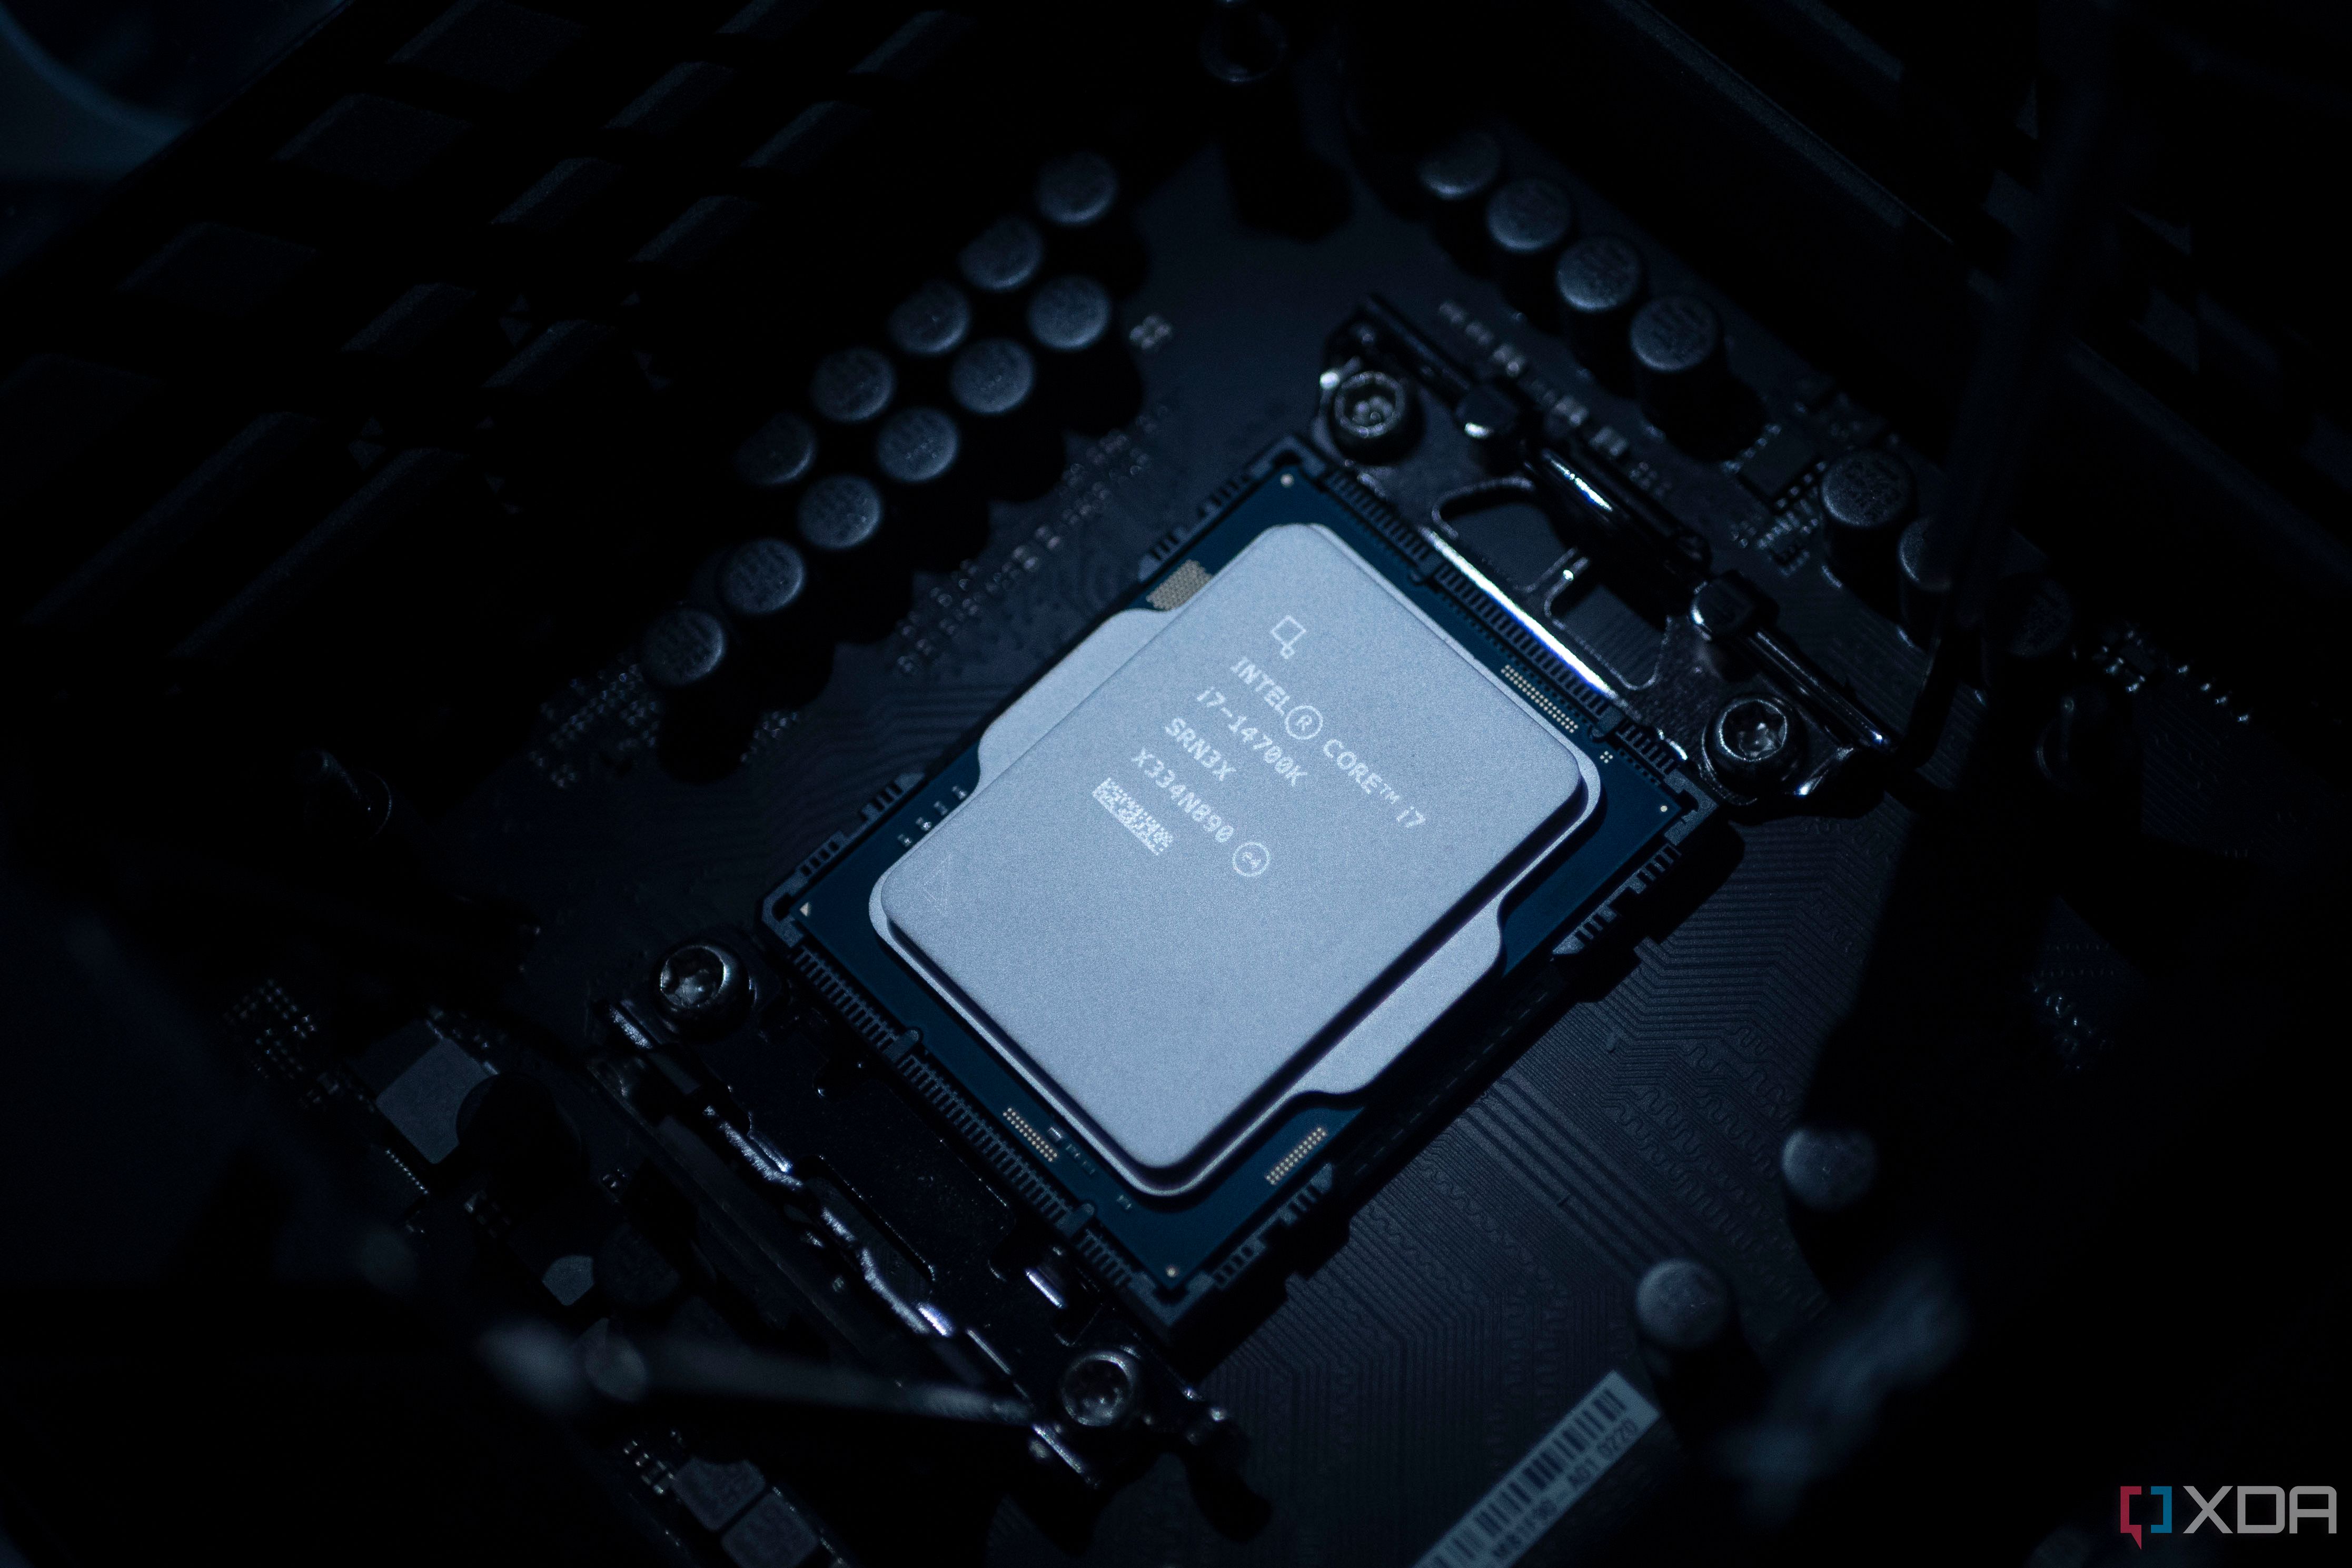 Intel Core i7-14700K ES CPU Is Up To 17% Faster Than 13700K In Leaked  Benchmarks, Overclocked To 5.8 GHz